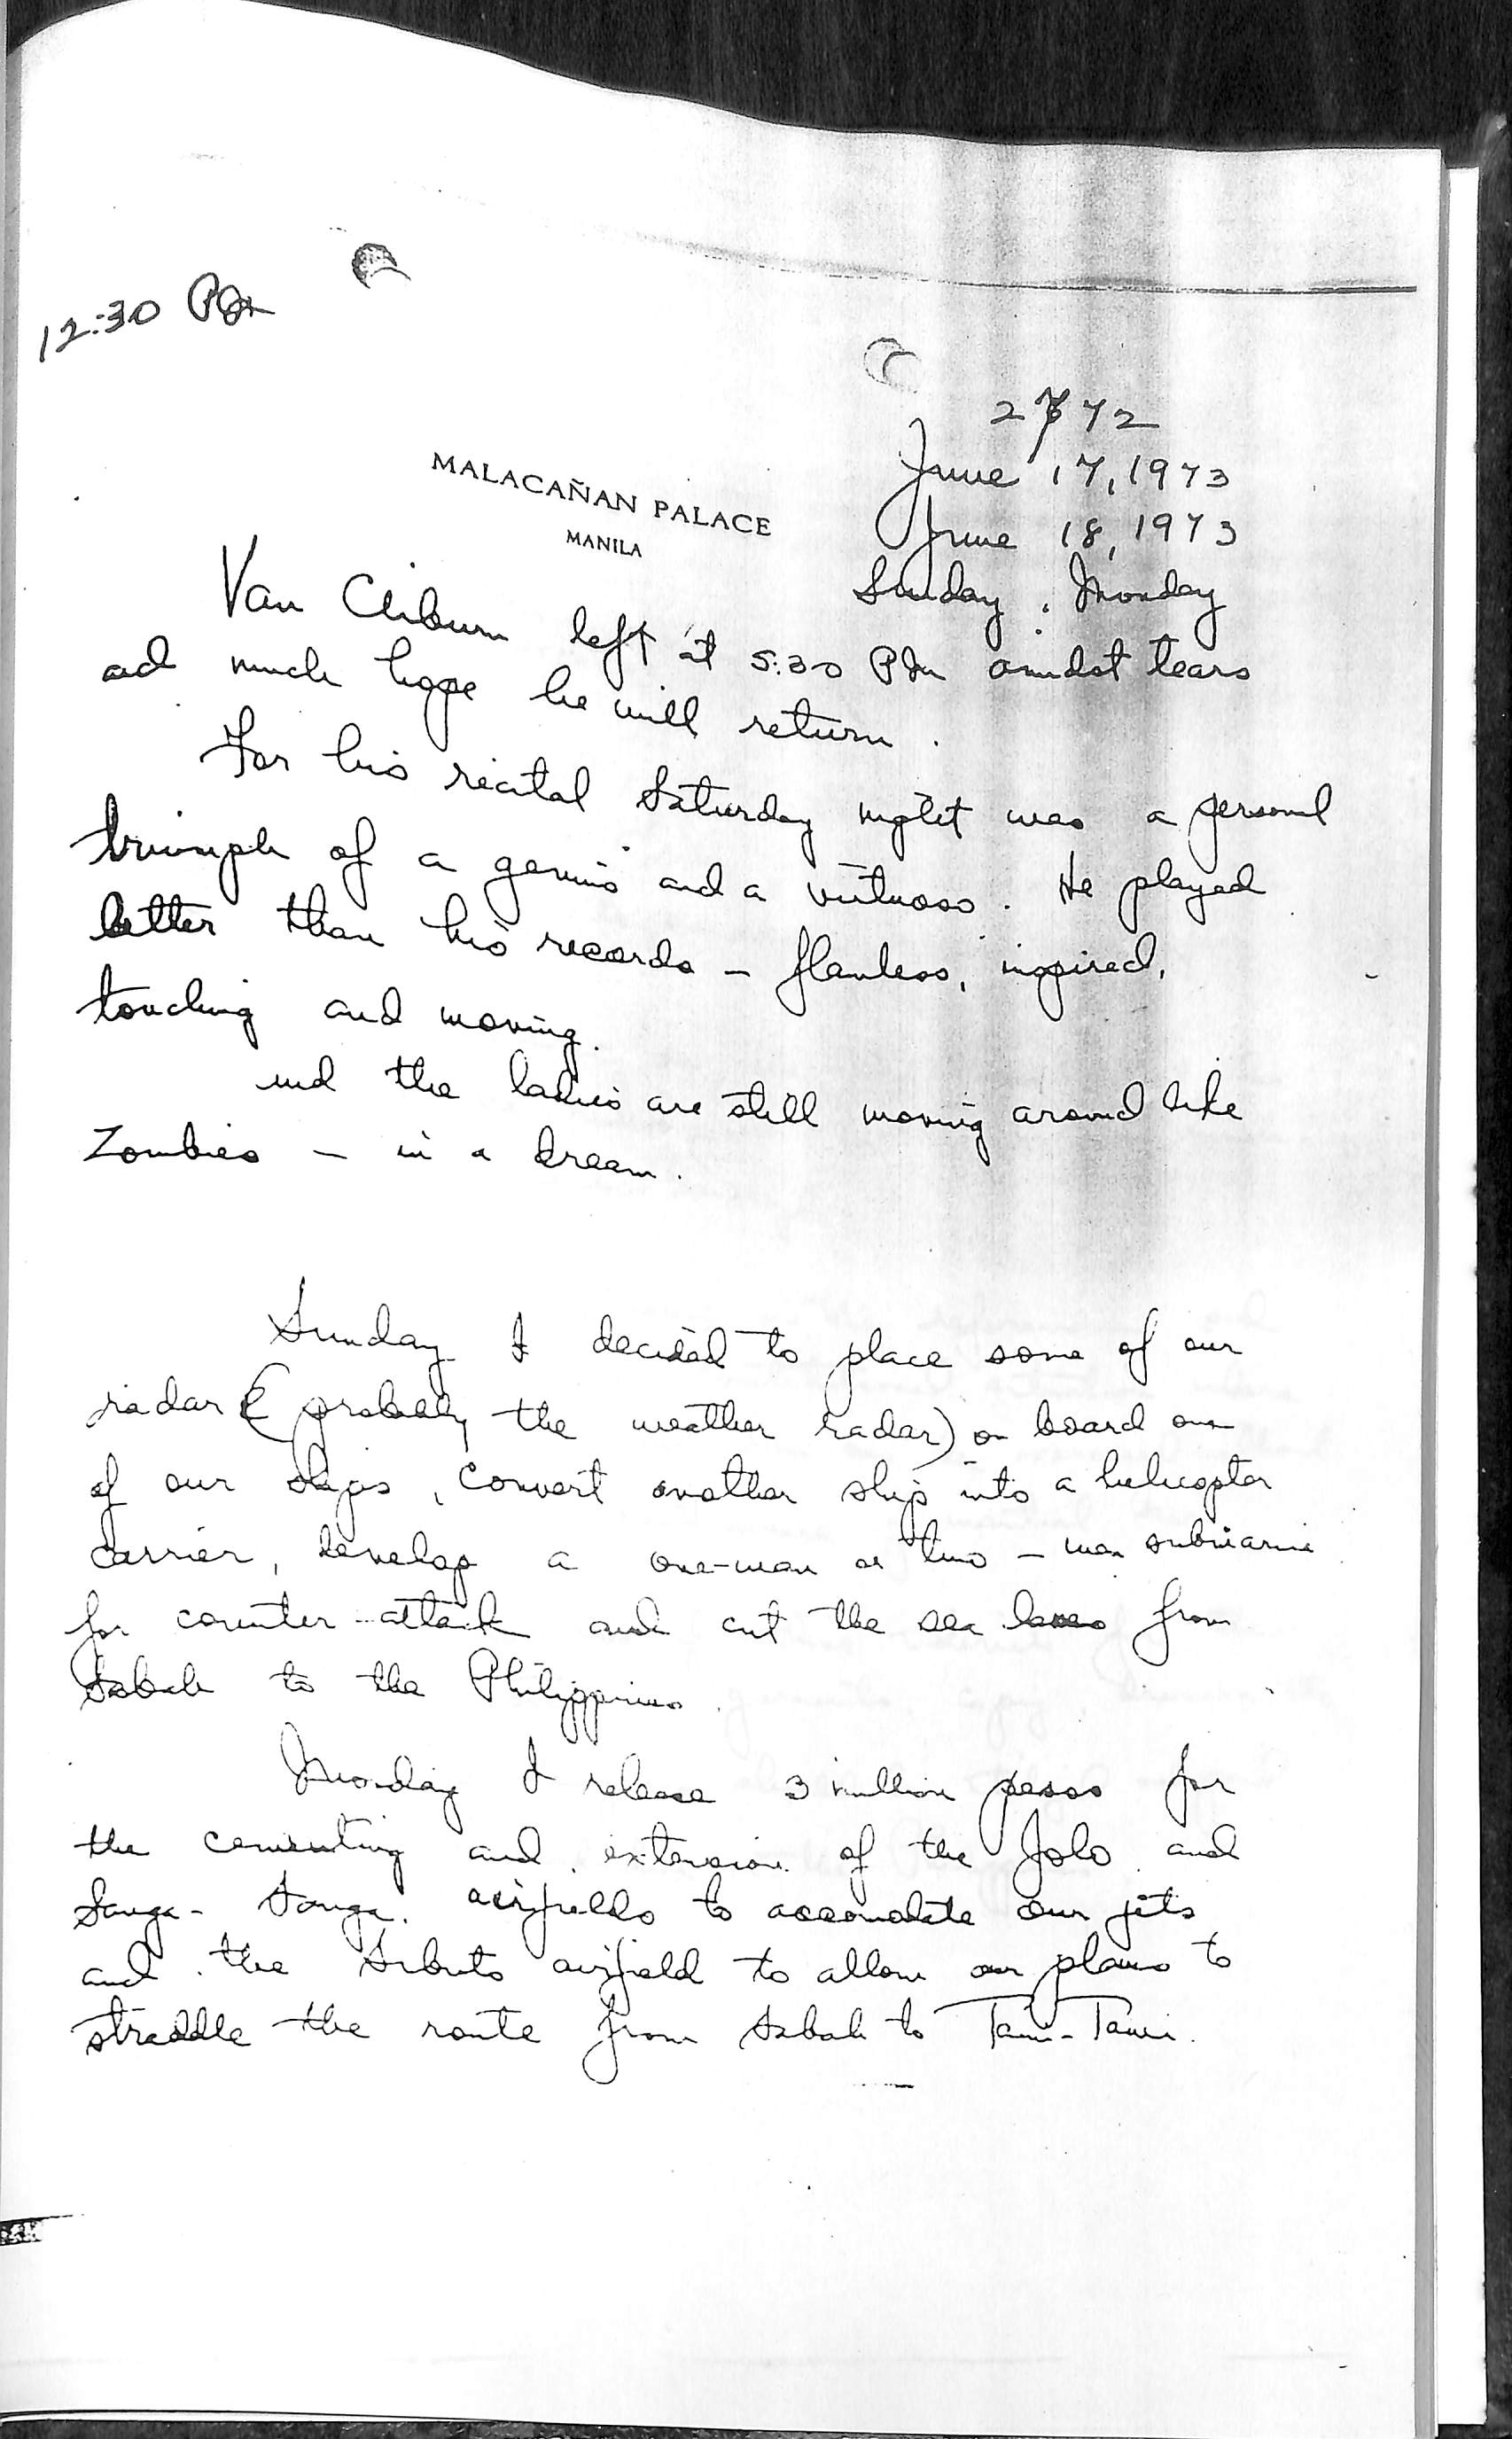 1973 Marcos Diary Black Book_Page_102.jpg